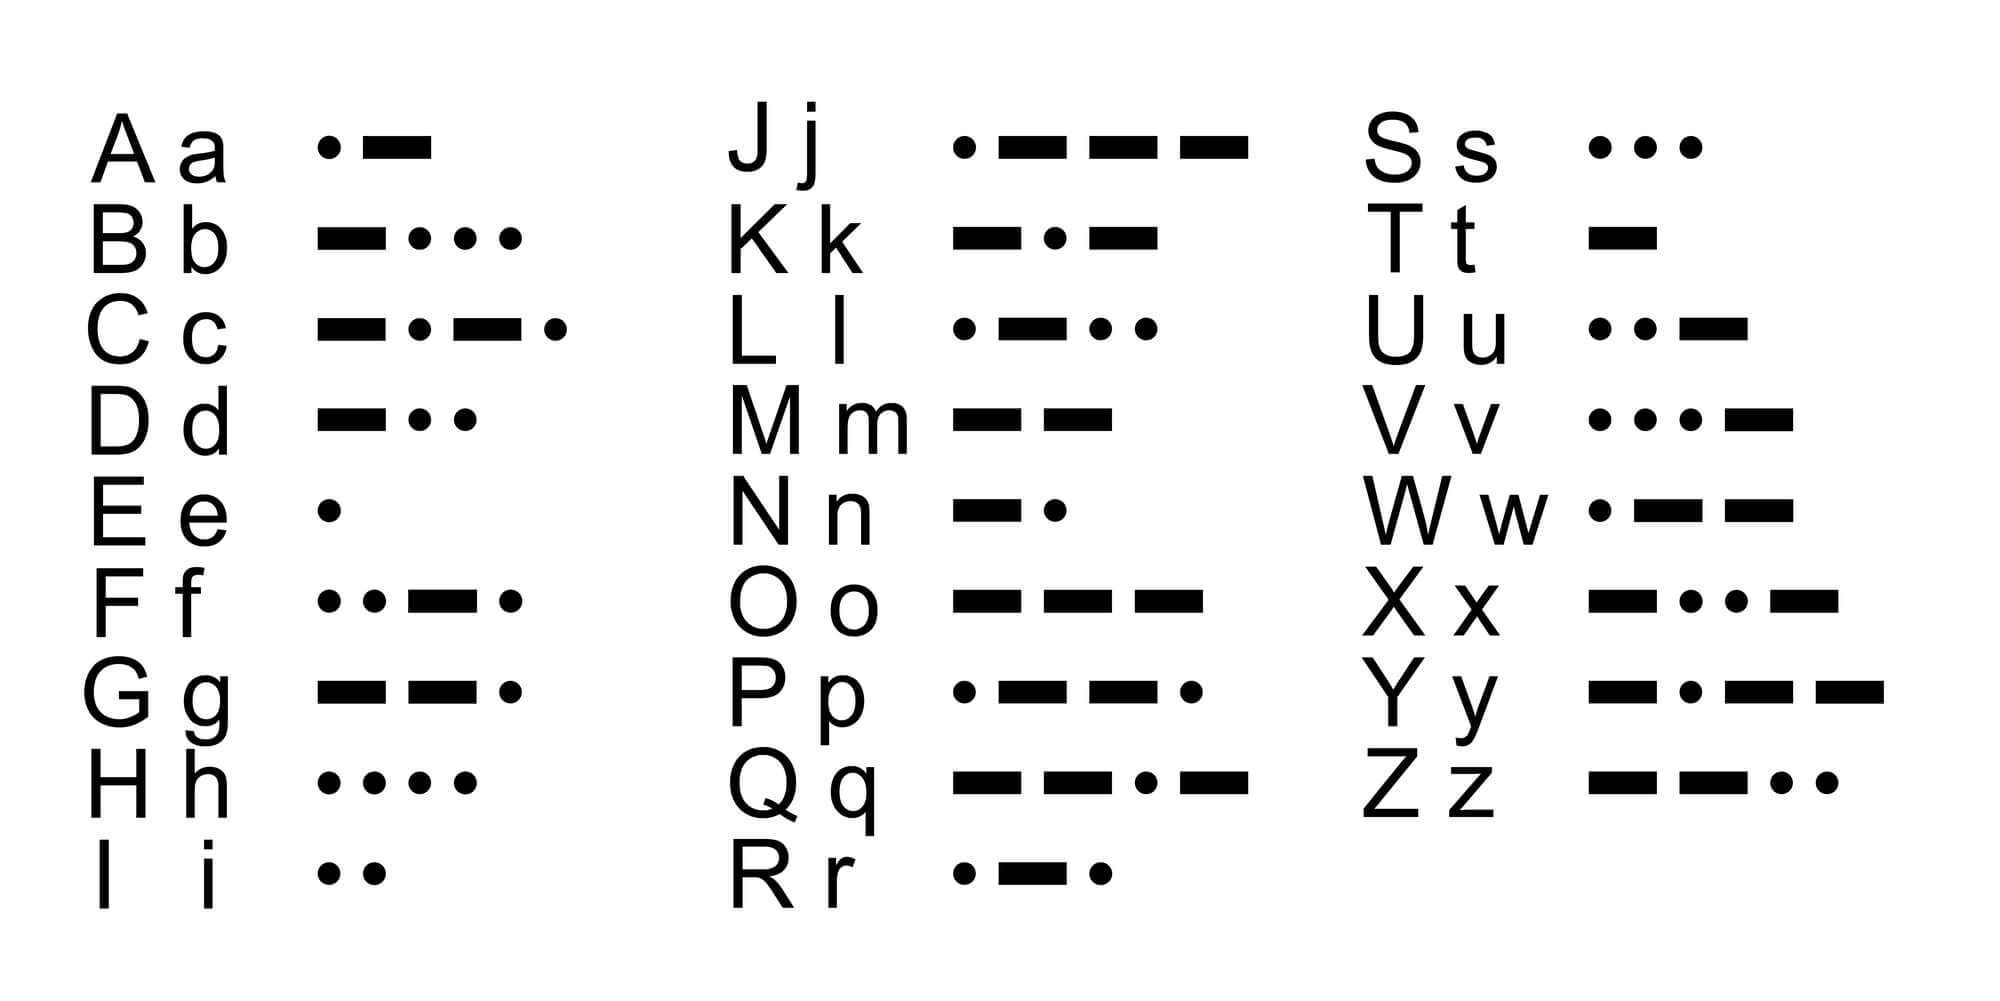 National Learn Your Name In Morse Code Day (January 11th)